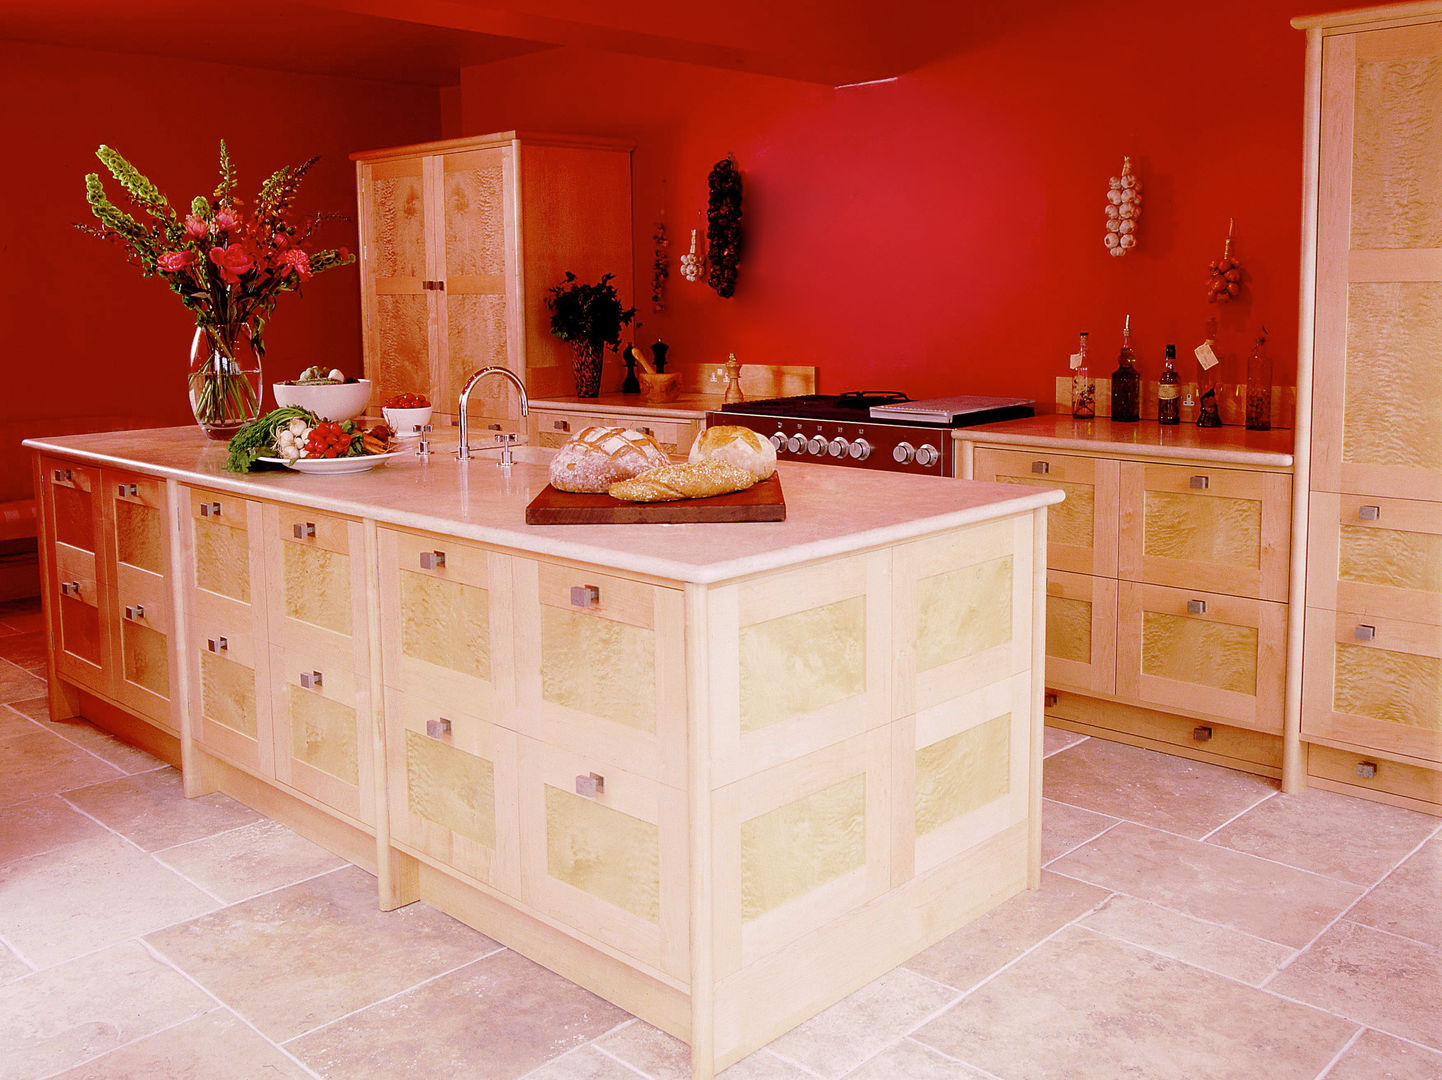 Quilted Maple Kitchen with Red Wall designed and made by Tim Wood Tim Wood Limited Cocinas de estilo moderno Armarios y estanterías